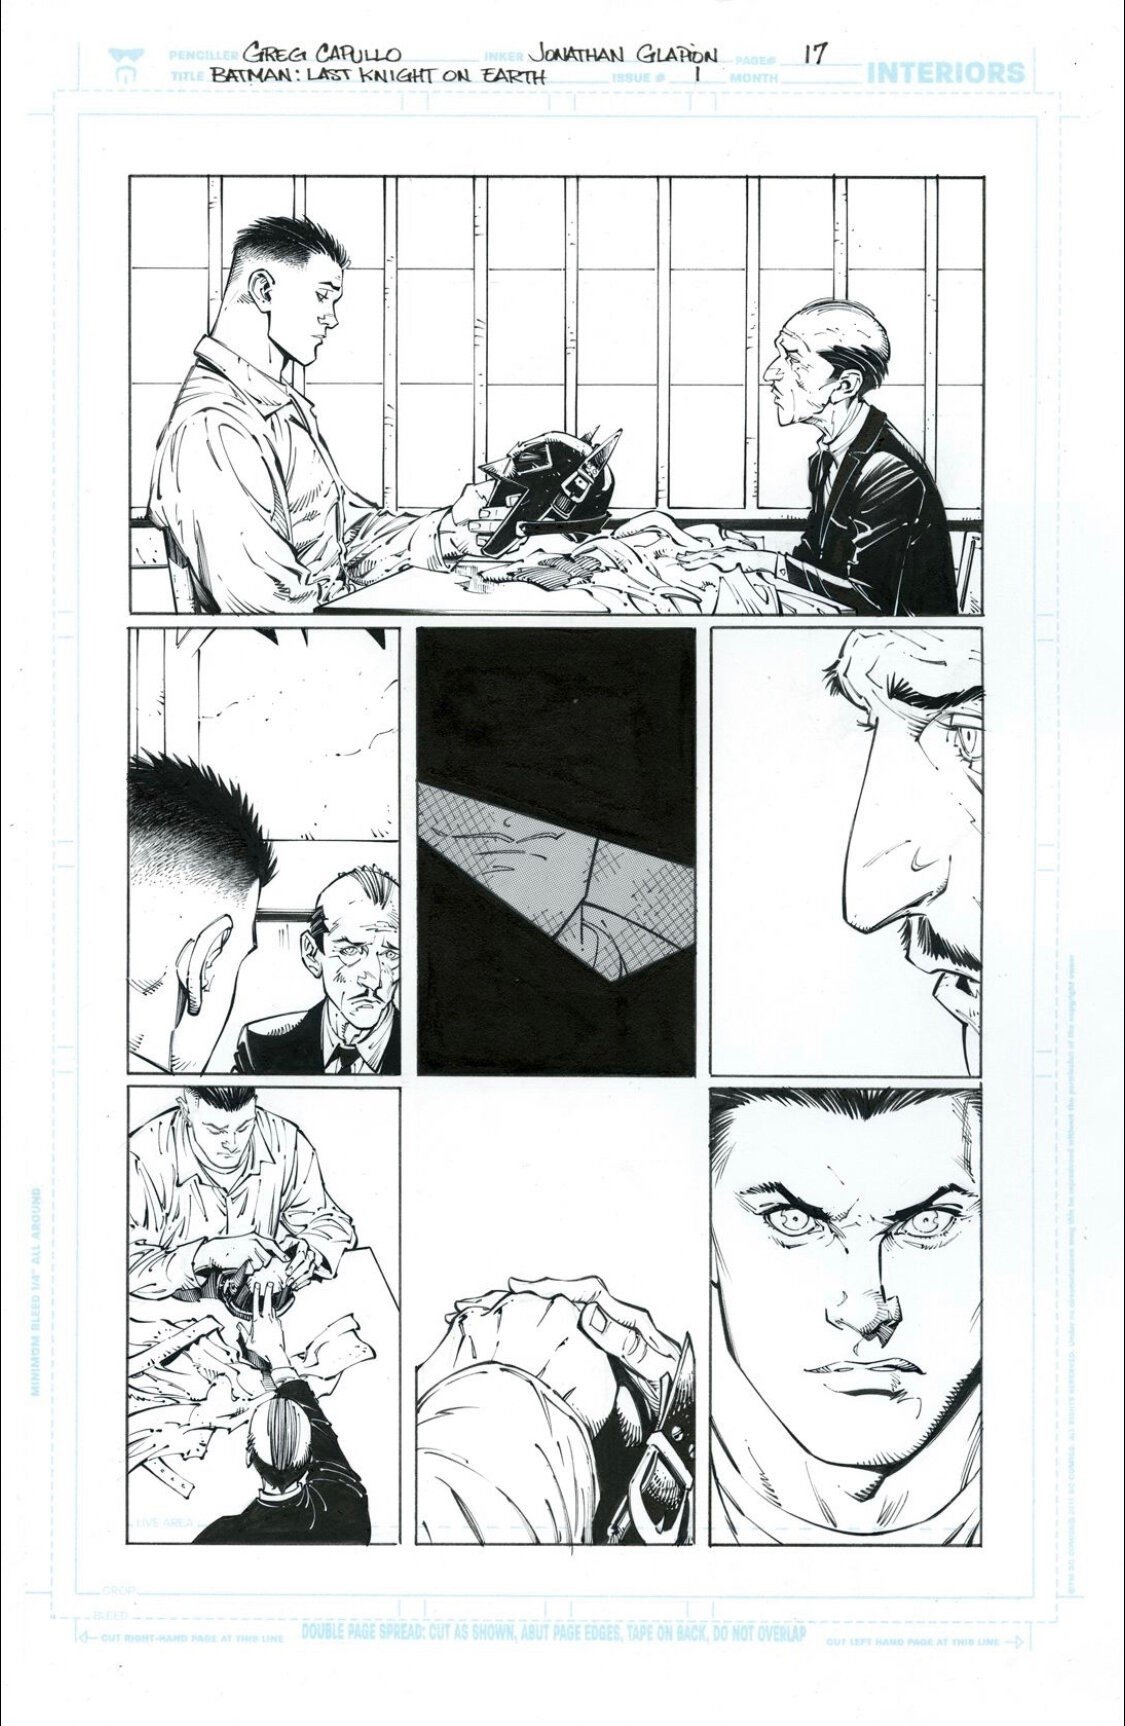 Batman: The Last Knight on Earth” Issue One Page 17 Writer: Scott Snyder  Pencils by: Greg Capullo Inks by: Jonathan Glapion, in Matt Todd's For Sale  Comic Art Gallery Room